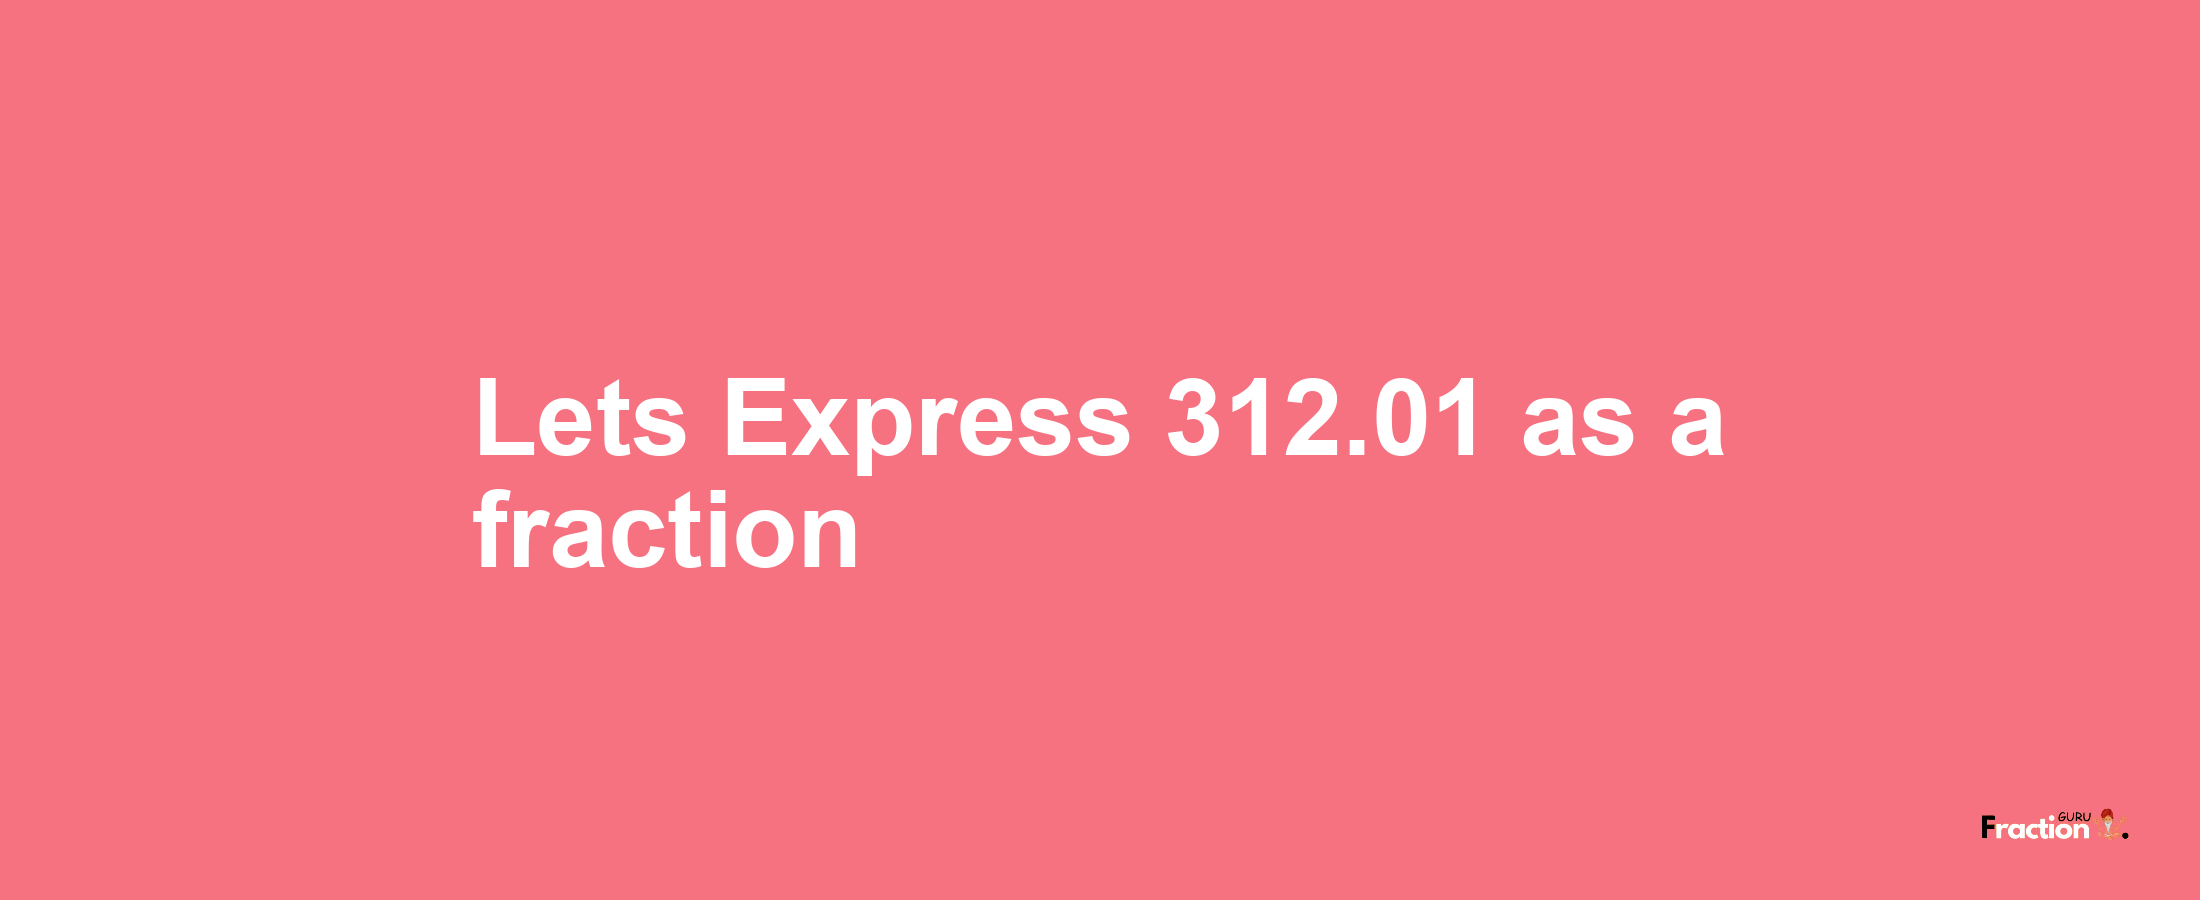 Lets Express 312.01 as afraction